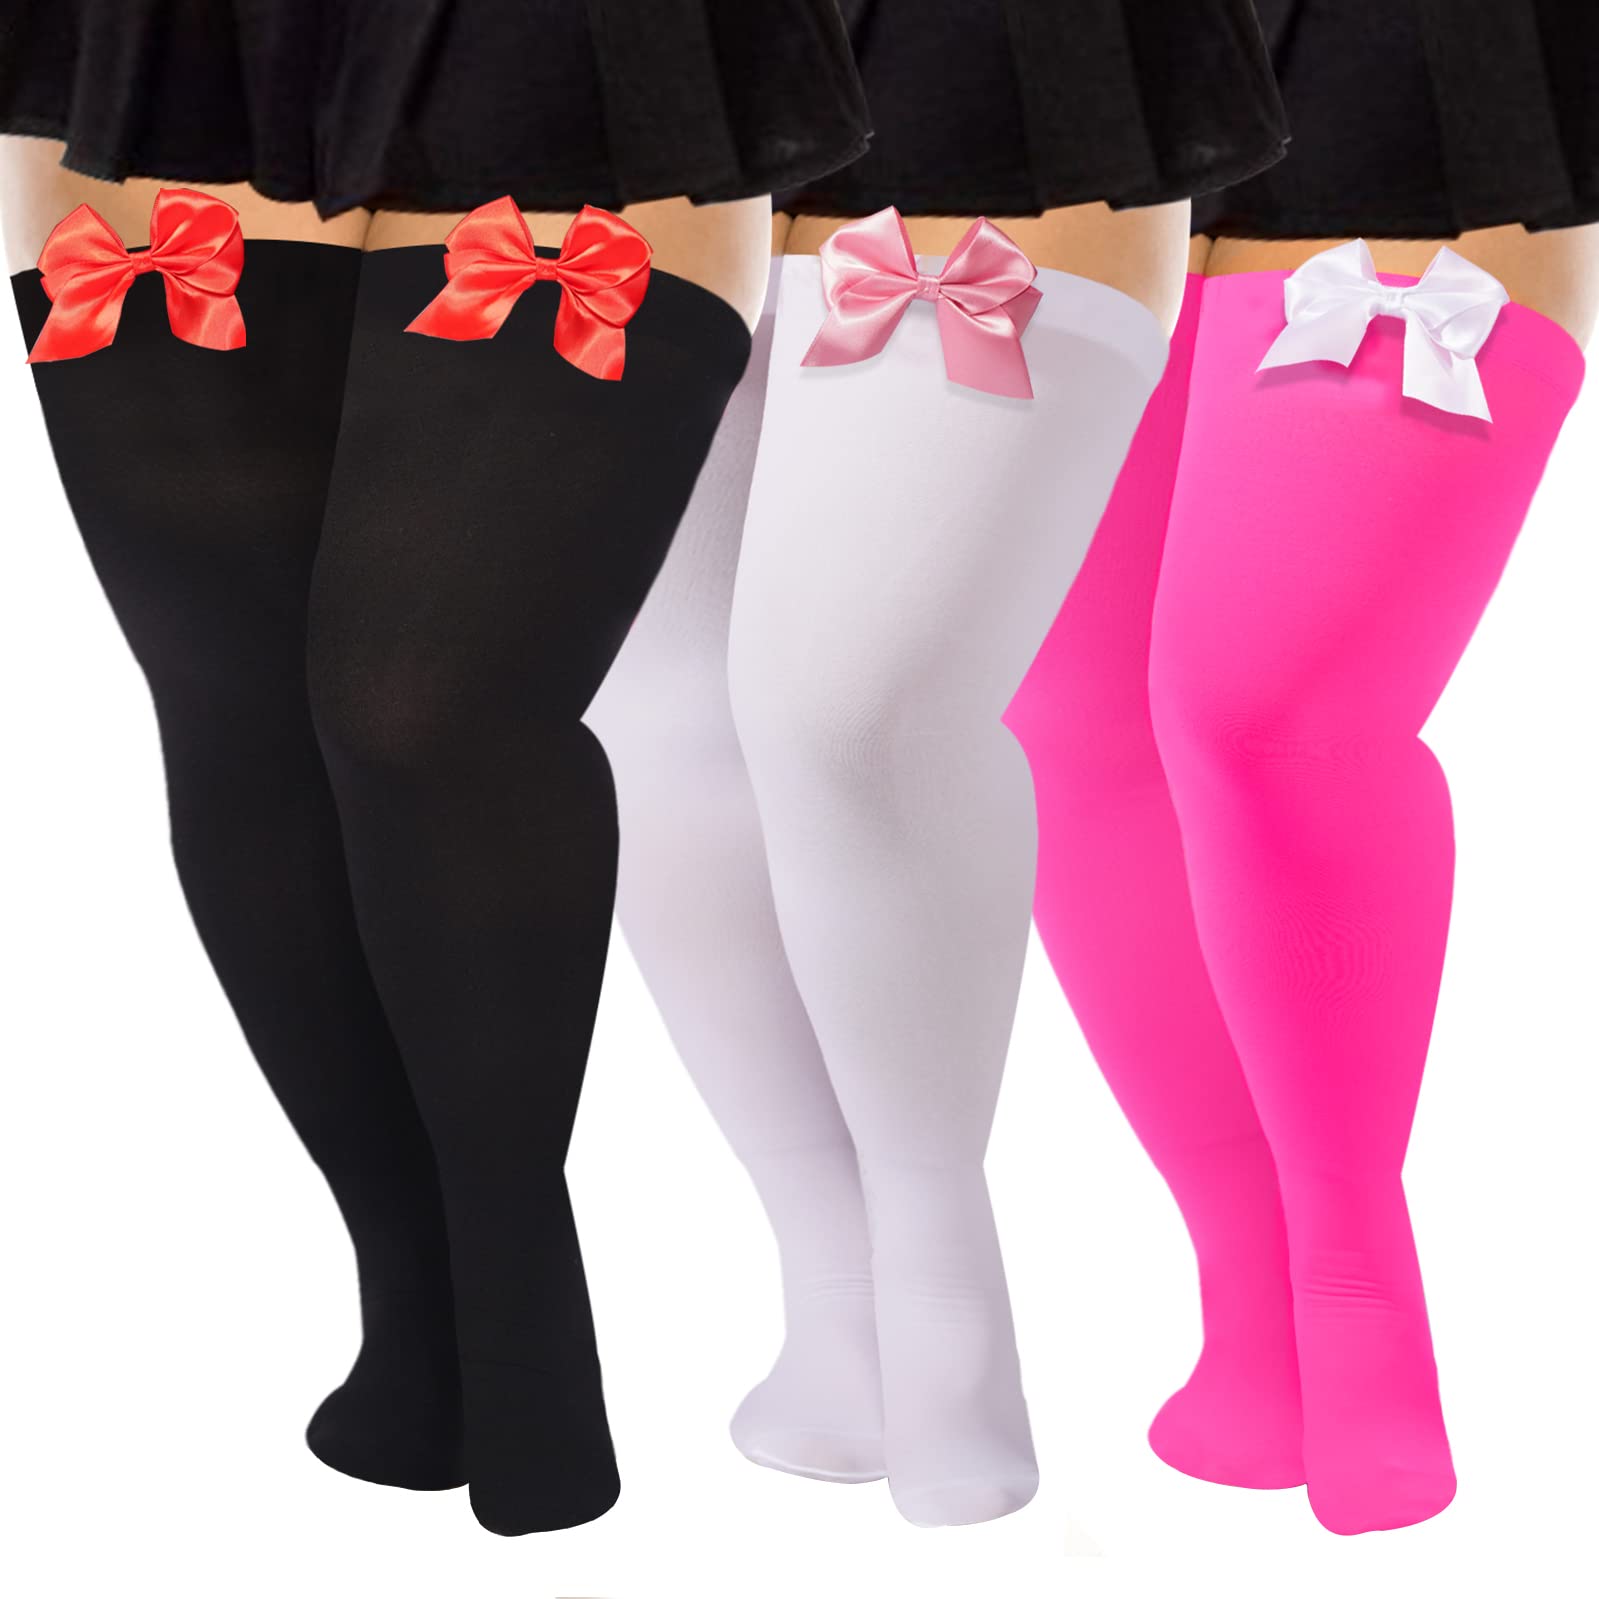 3 Pairs Women Plus Size Bow Thigh High Stockings